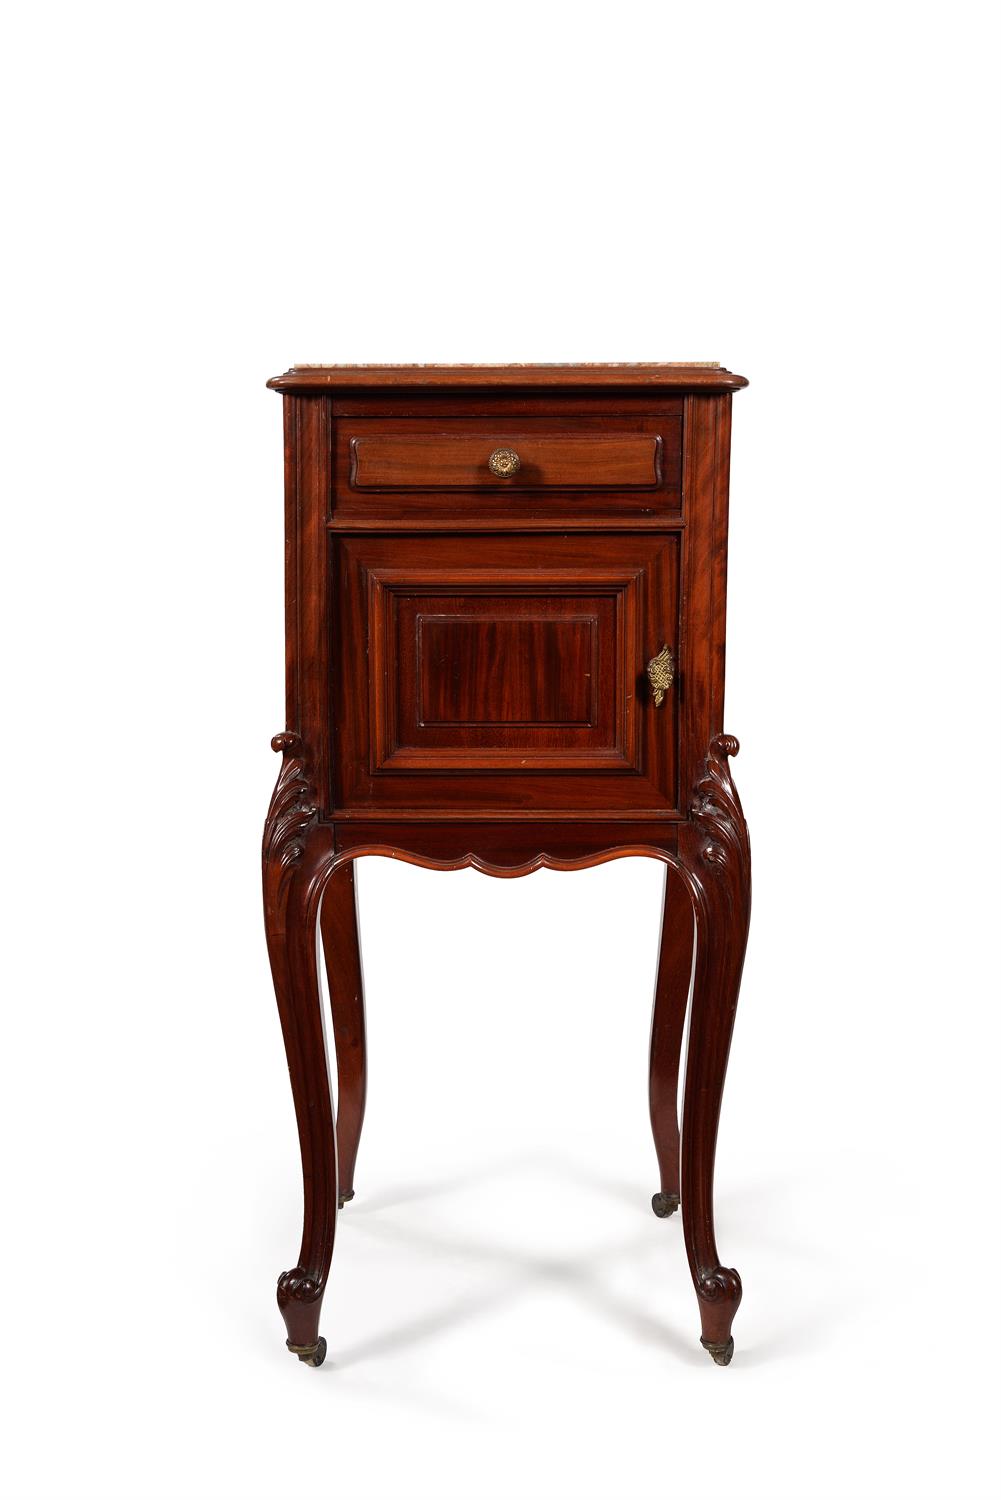 A pair of French mahogany bedside cabinets, late 19th/early 20th century - Image 2 of 3